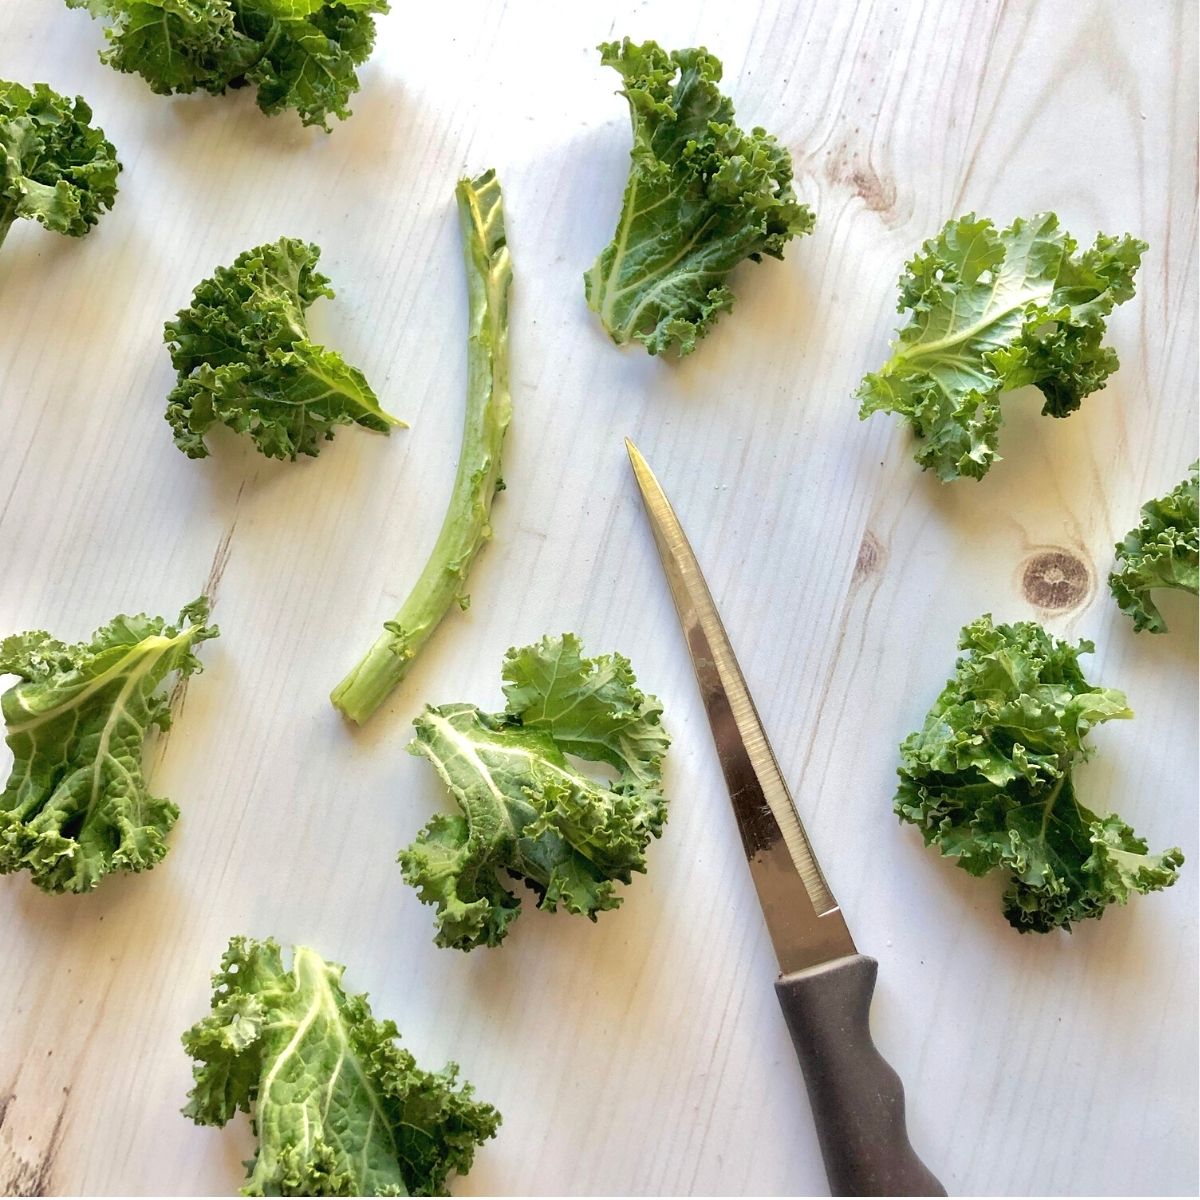 a knife, long stem, and 2-3 inch pieces of kale all separated from each other.